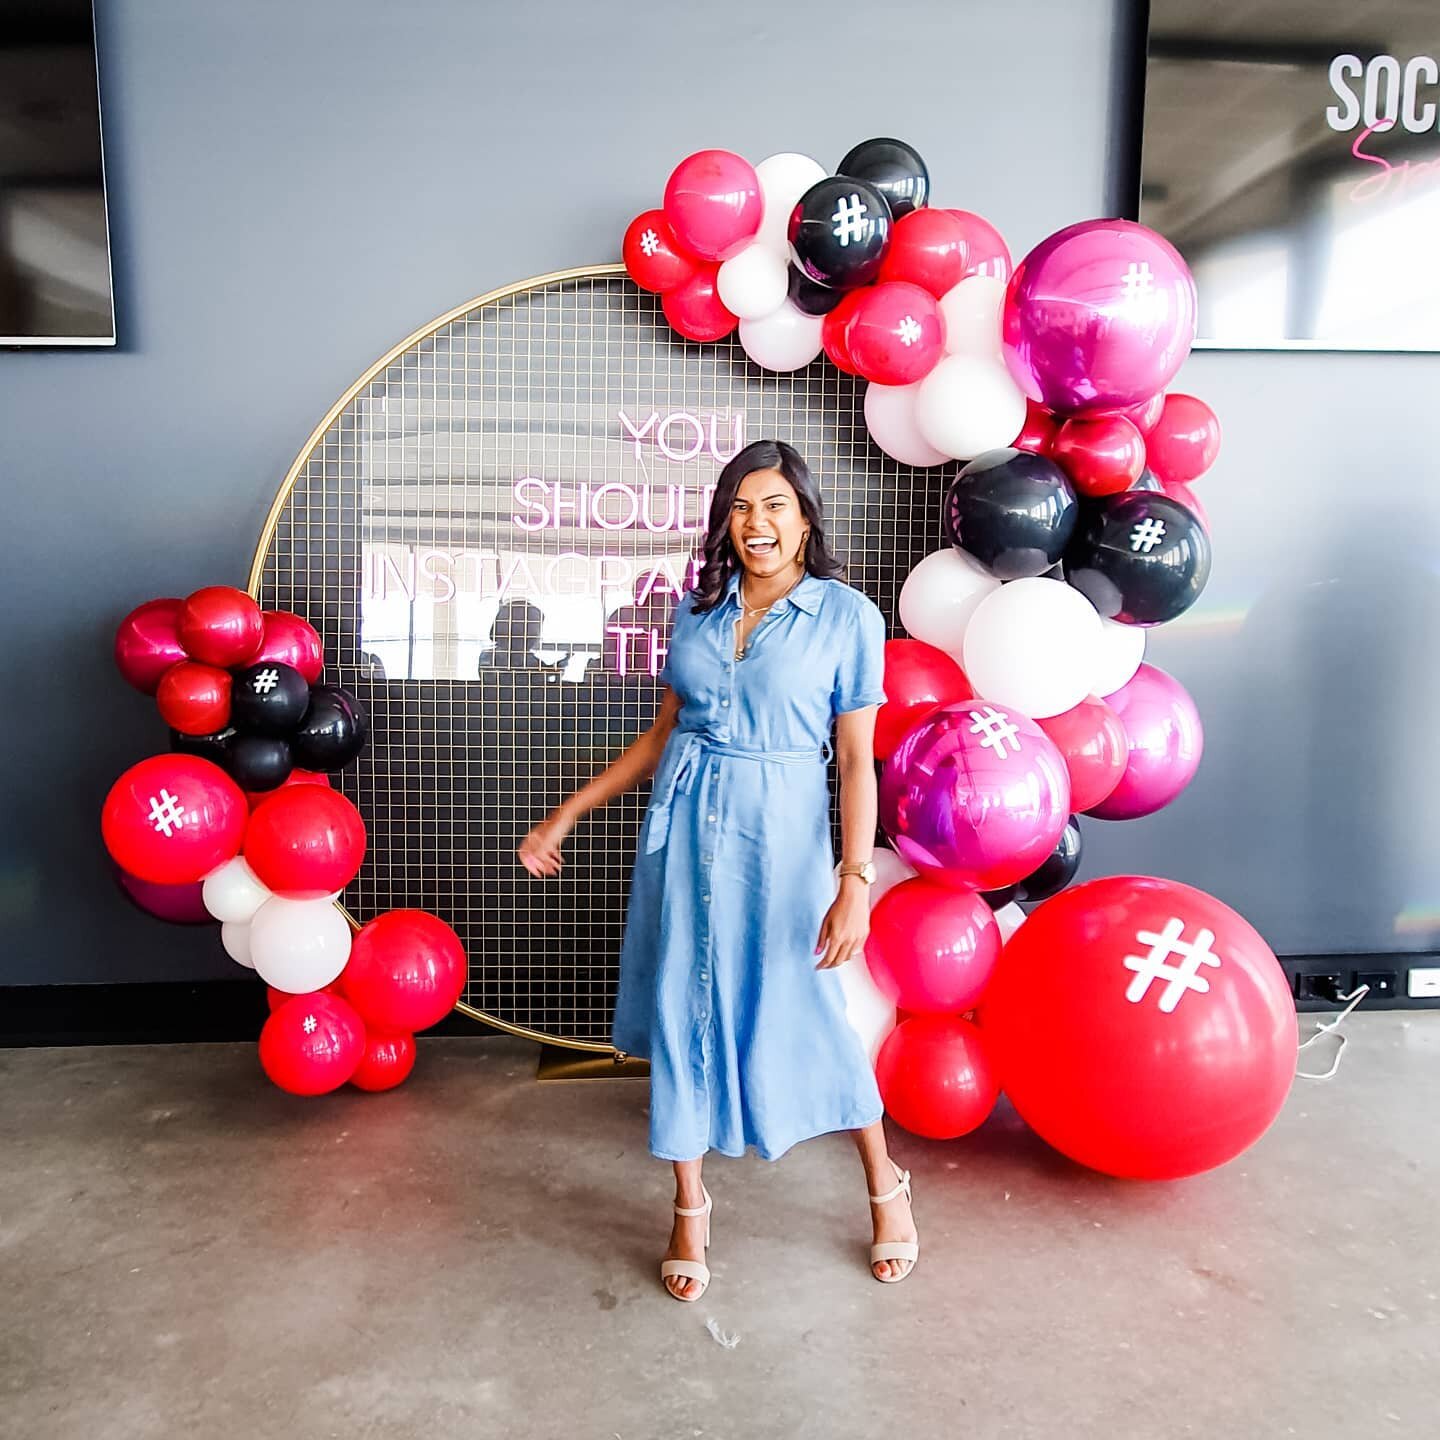 Still pinching myself 🥳🤩

Yesterday, I got to be one of the guest speakers at the first @socialclubcommunity Spotlight Event, being interviewed by the gorgeous @brookevulinovich 

I've been in such a dream bubble since the event and I cannot believ